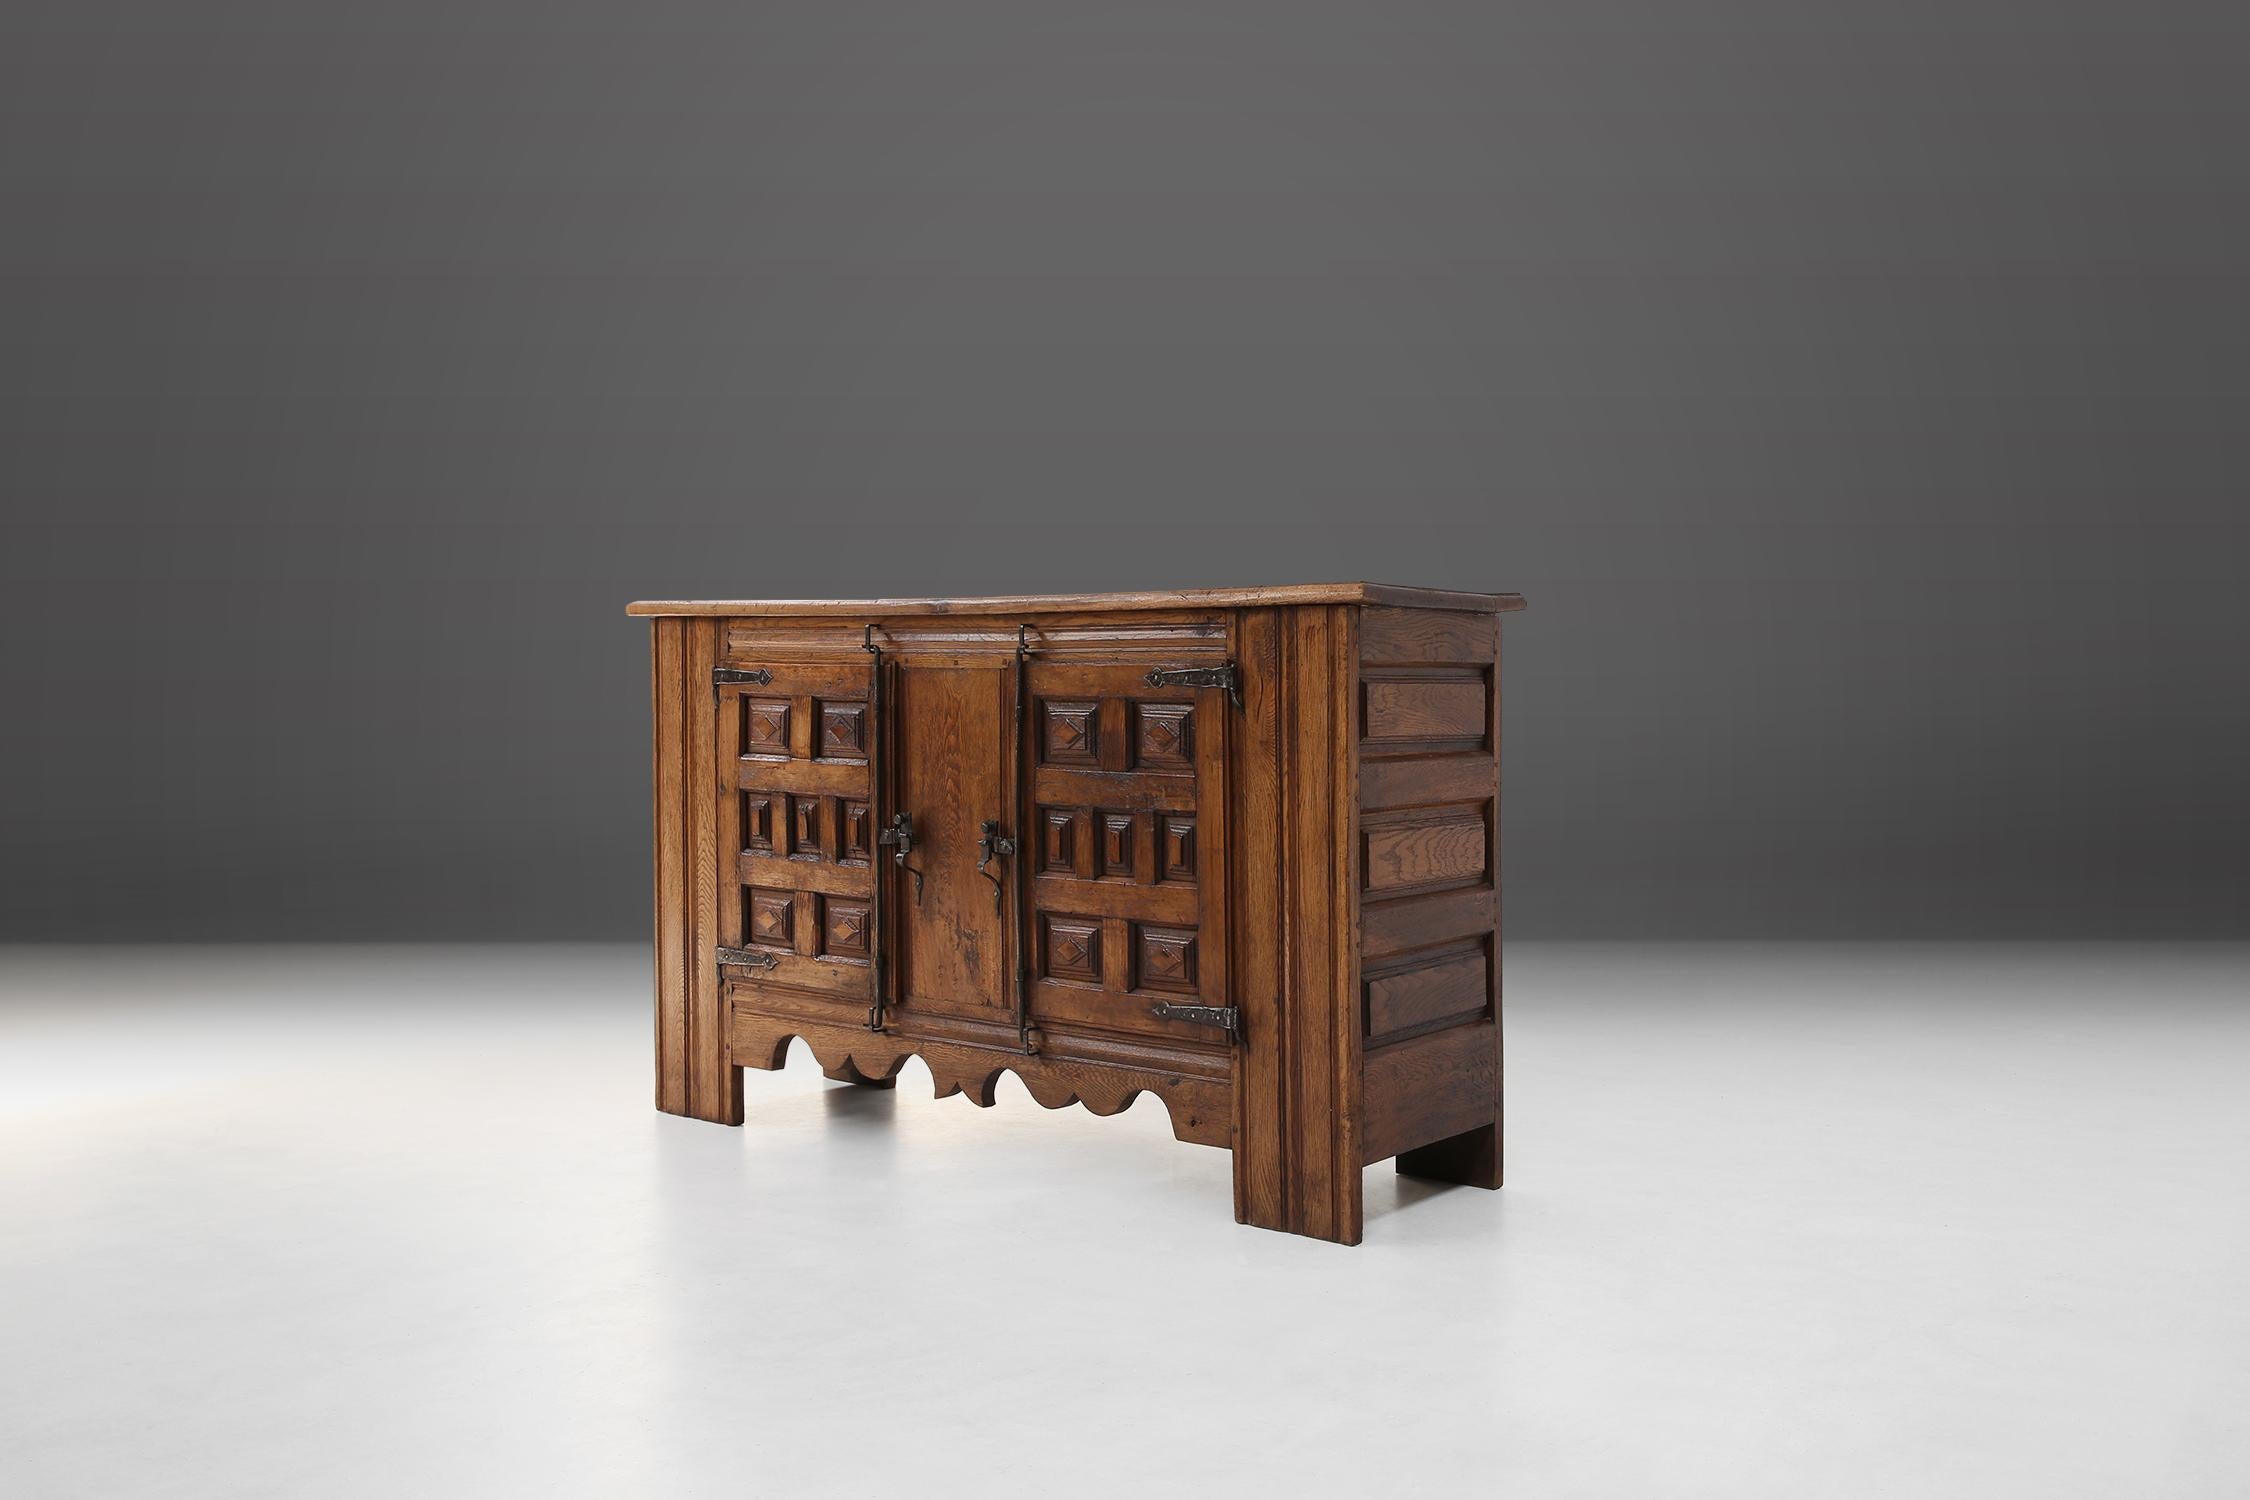 A 17th century Spanish sideboard made of oak wood is a beautiful piece of furniture that reflects the charm and history of the past. This sideboard is made in the Spanish style, which is characterized by a robust and sober design, with influences